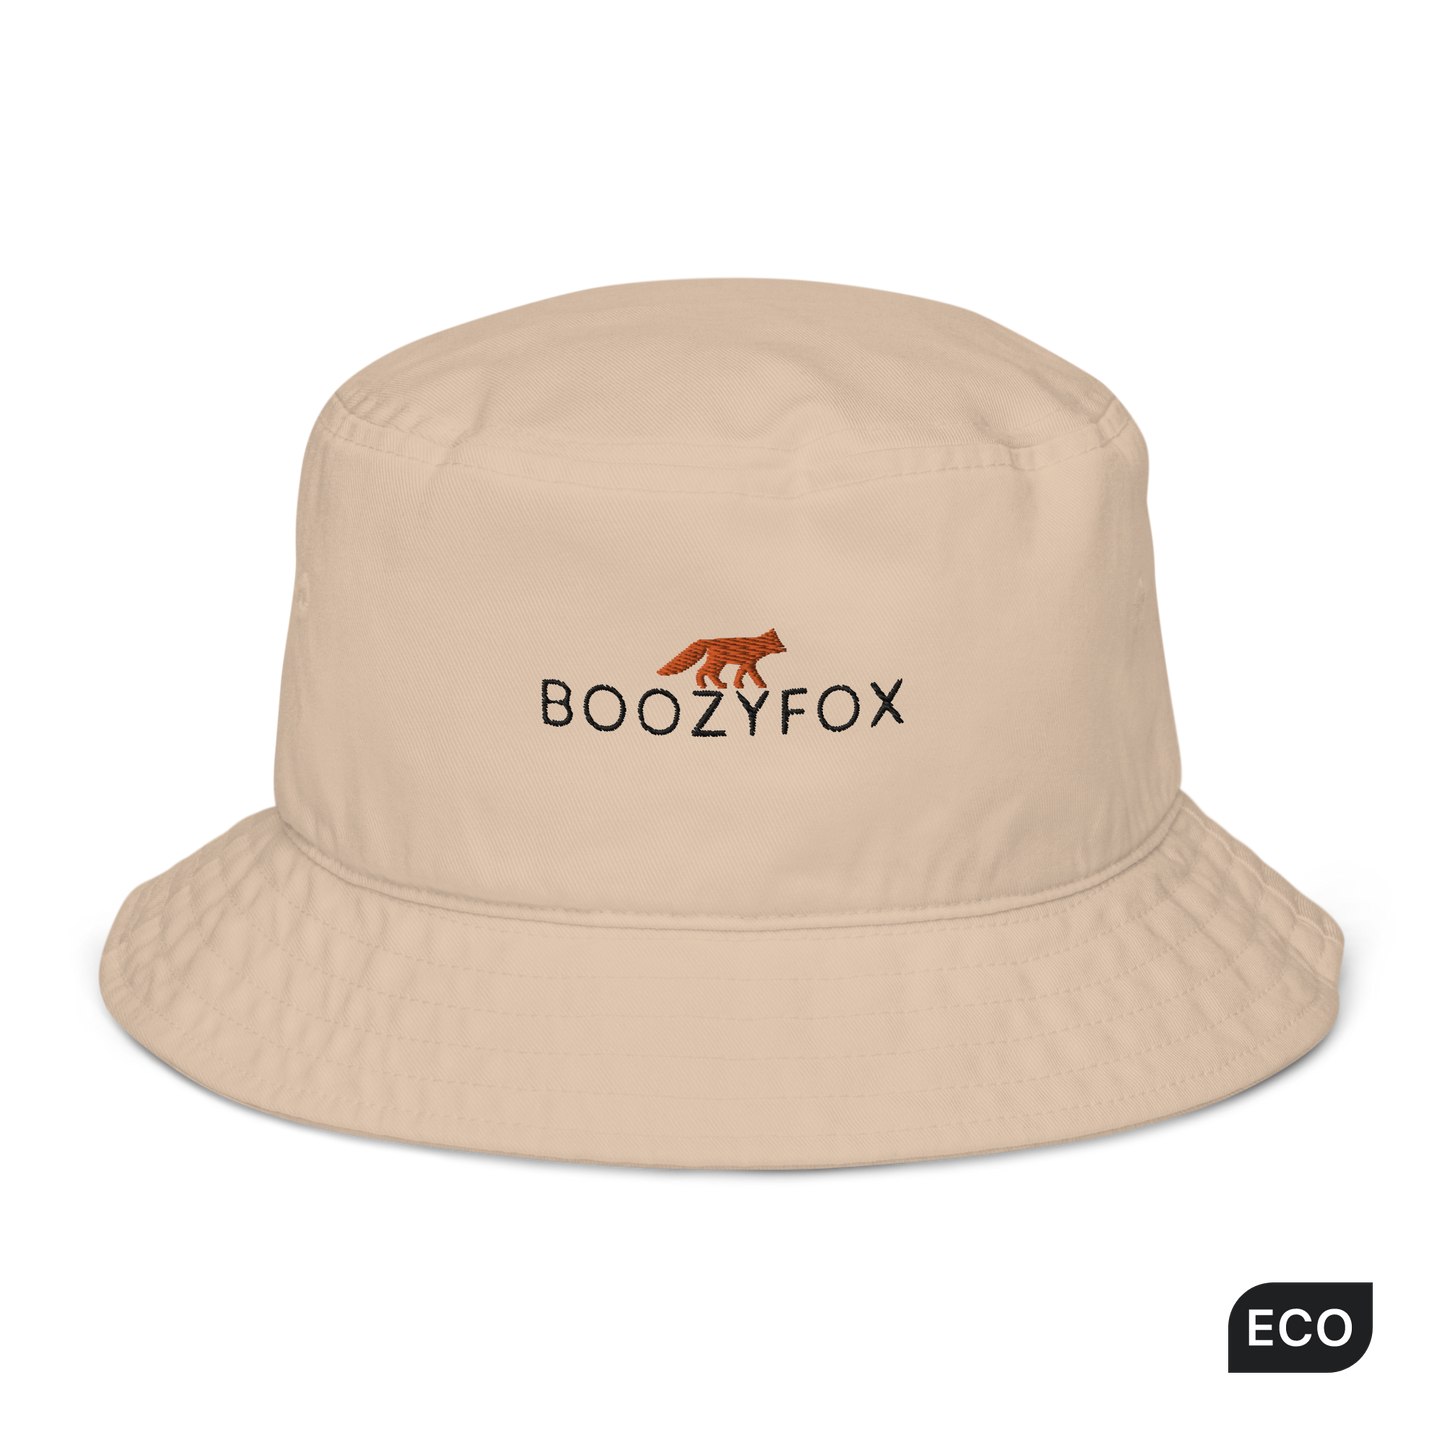 Stone Colored Organic Bucket Hat featuring a recognizable Boozy Fox embroidery logo on the front - Bucket Hats - Boozy Fox